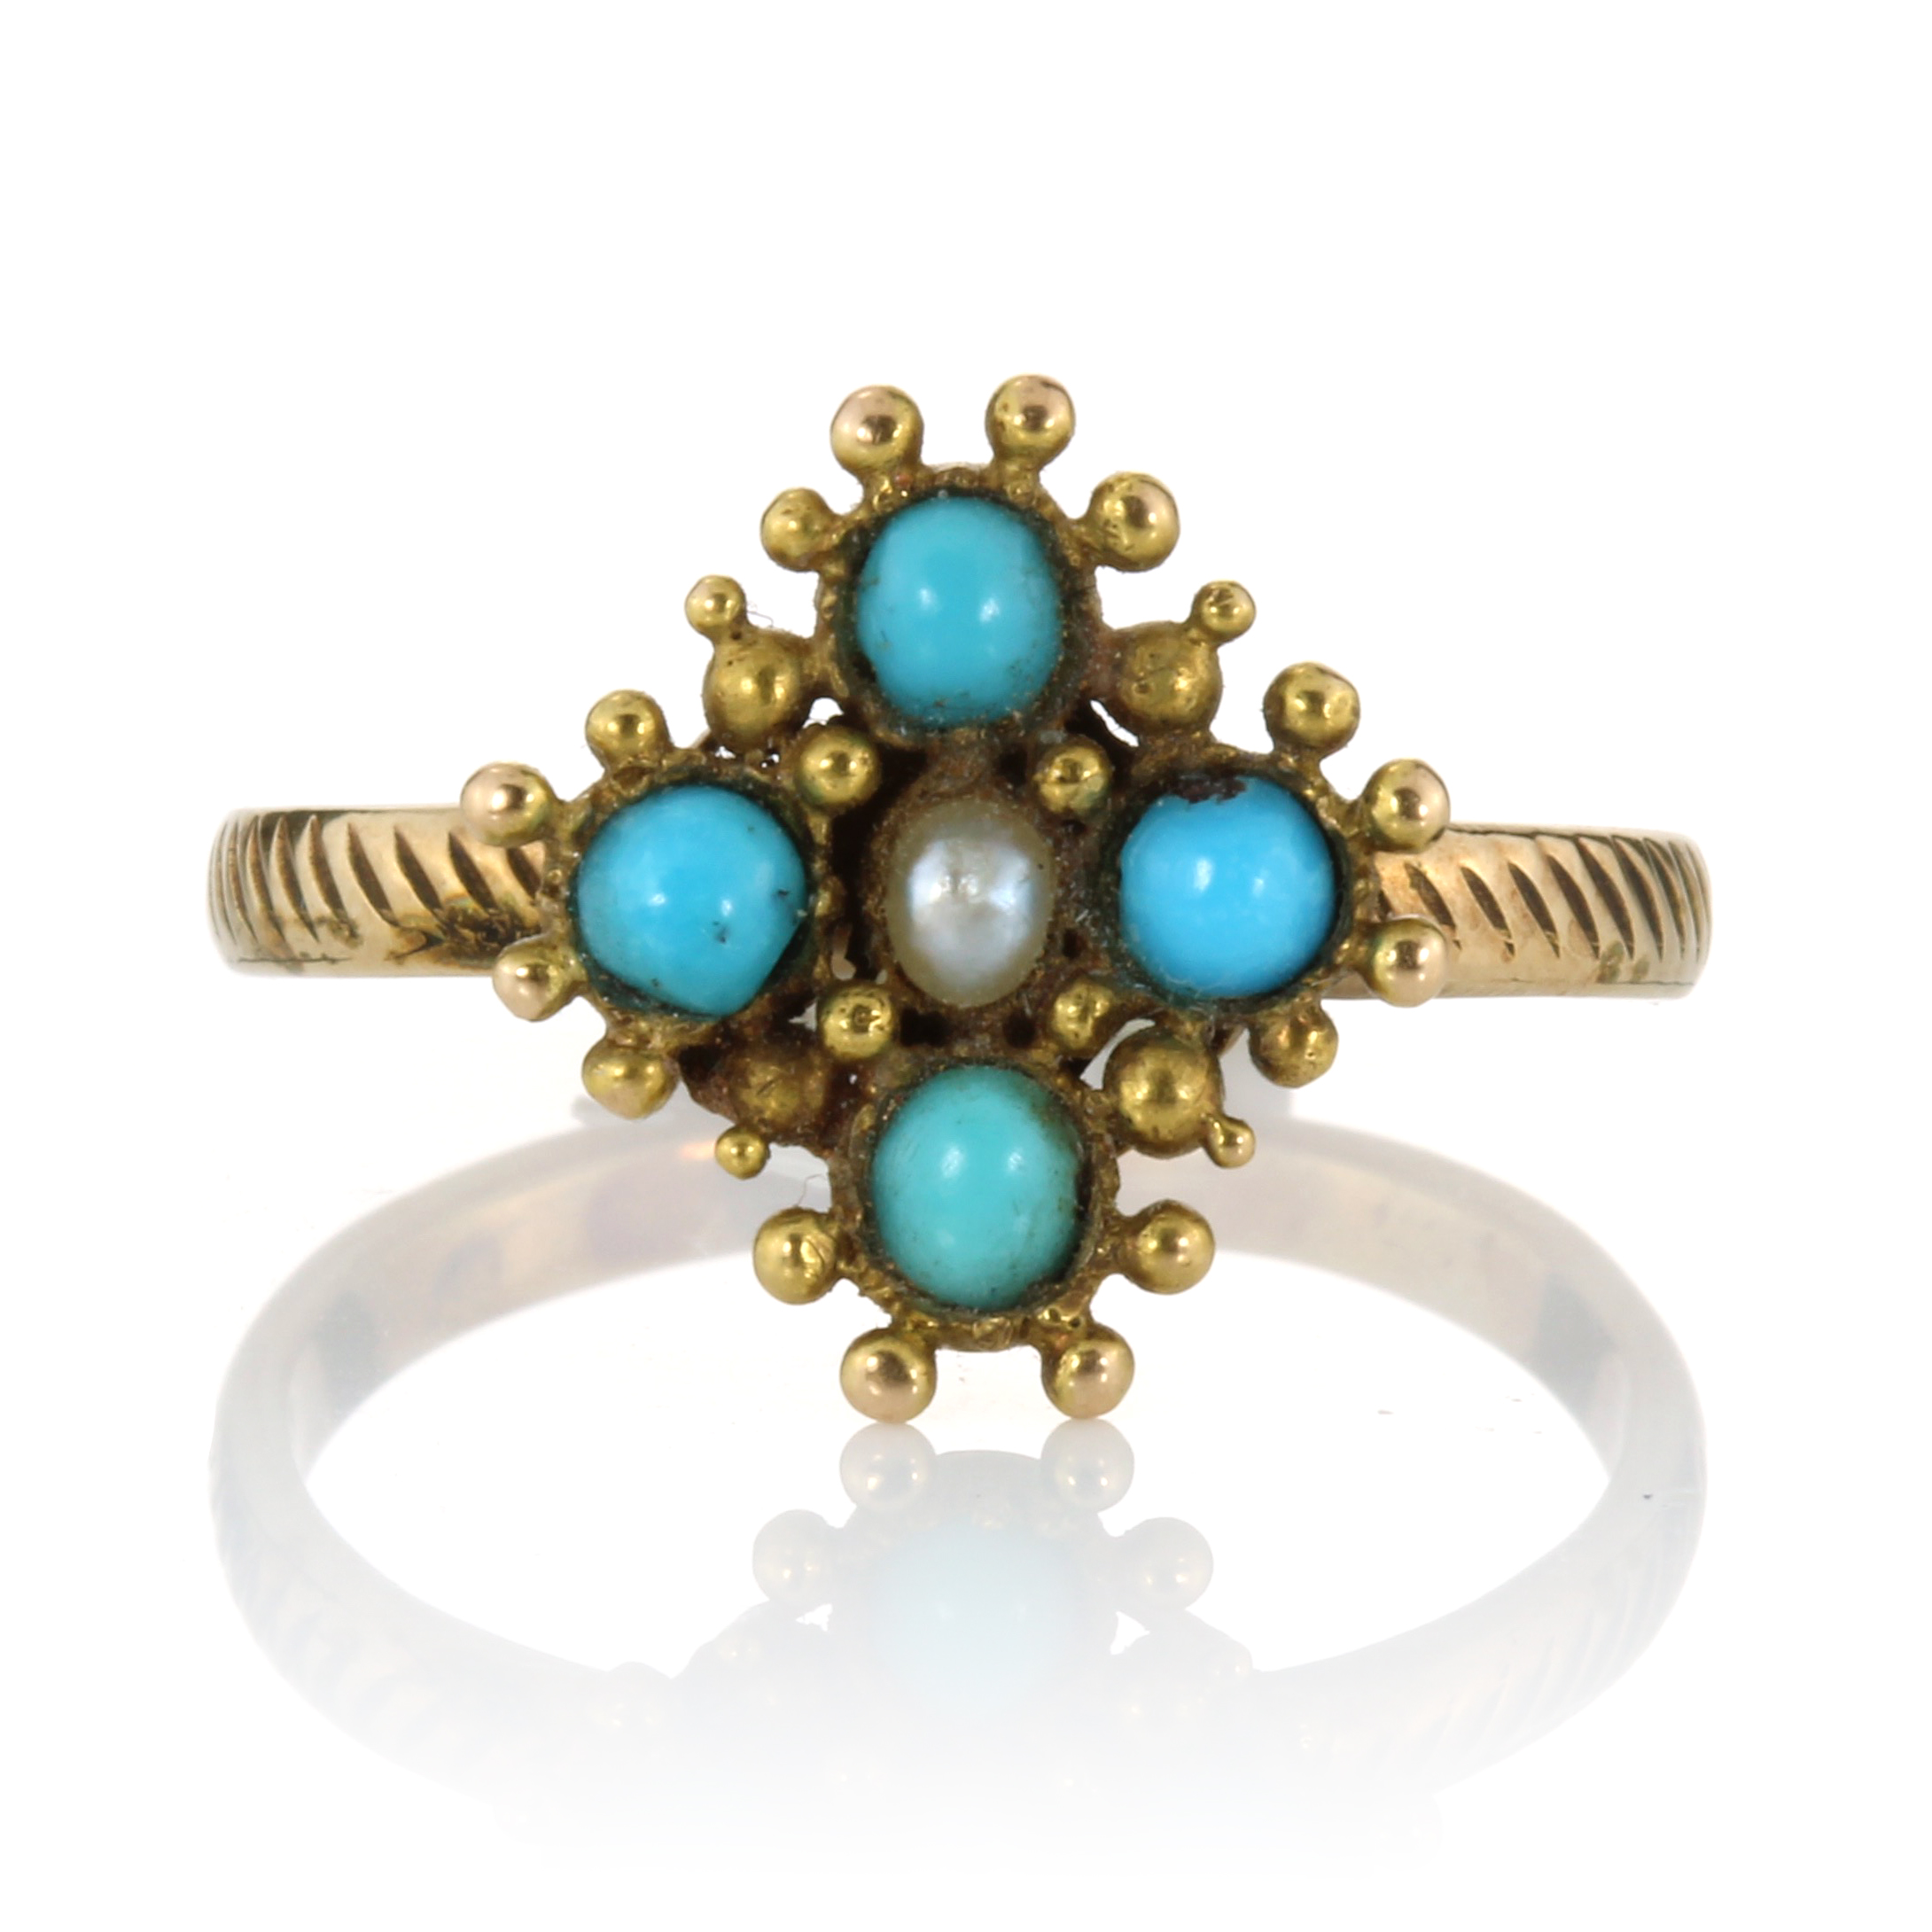 AN ANTIQUE TURQUOISE AND PEARL DRESS RING set with a central pearl surrounded by four turquoise